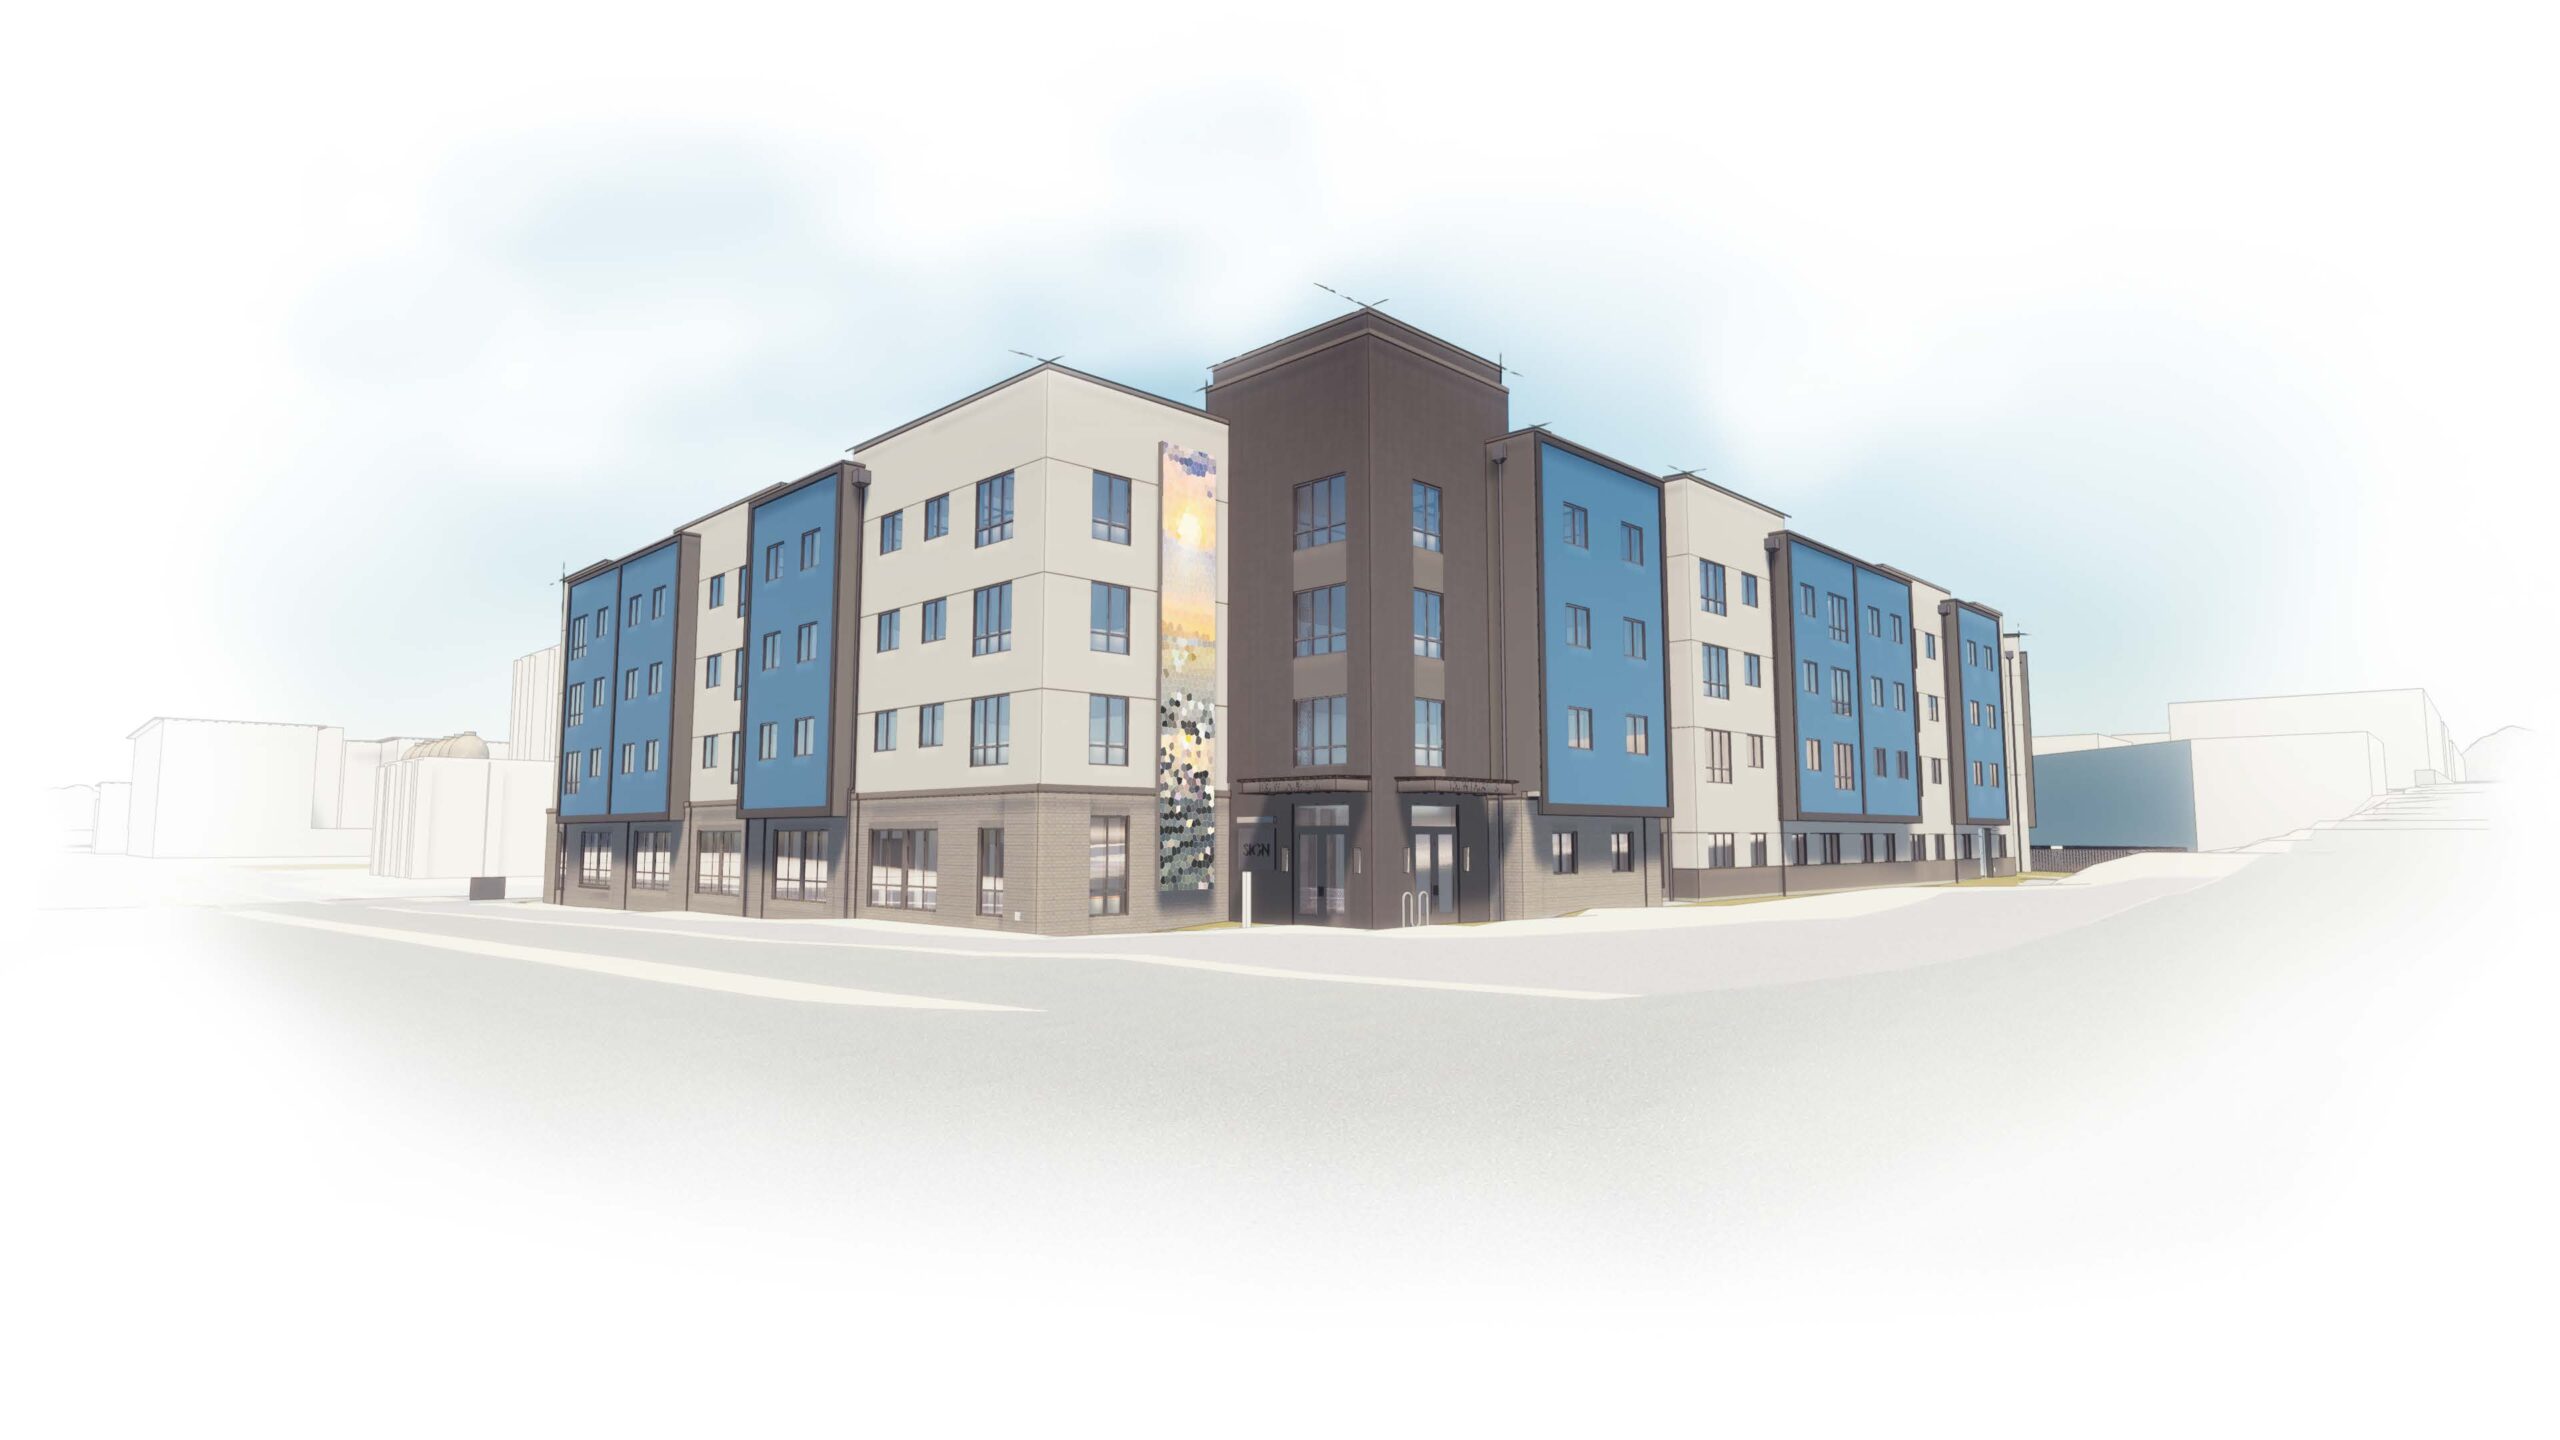 rendering of a 4 story building with windows